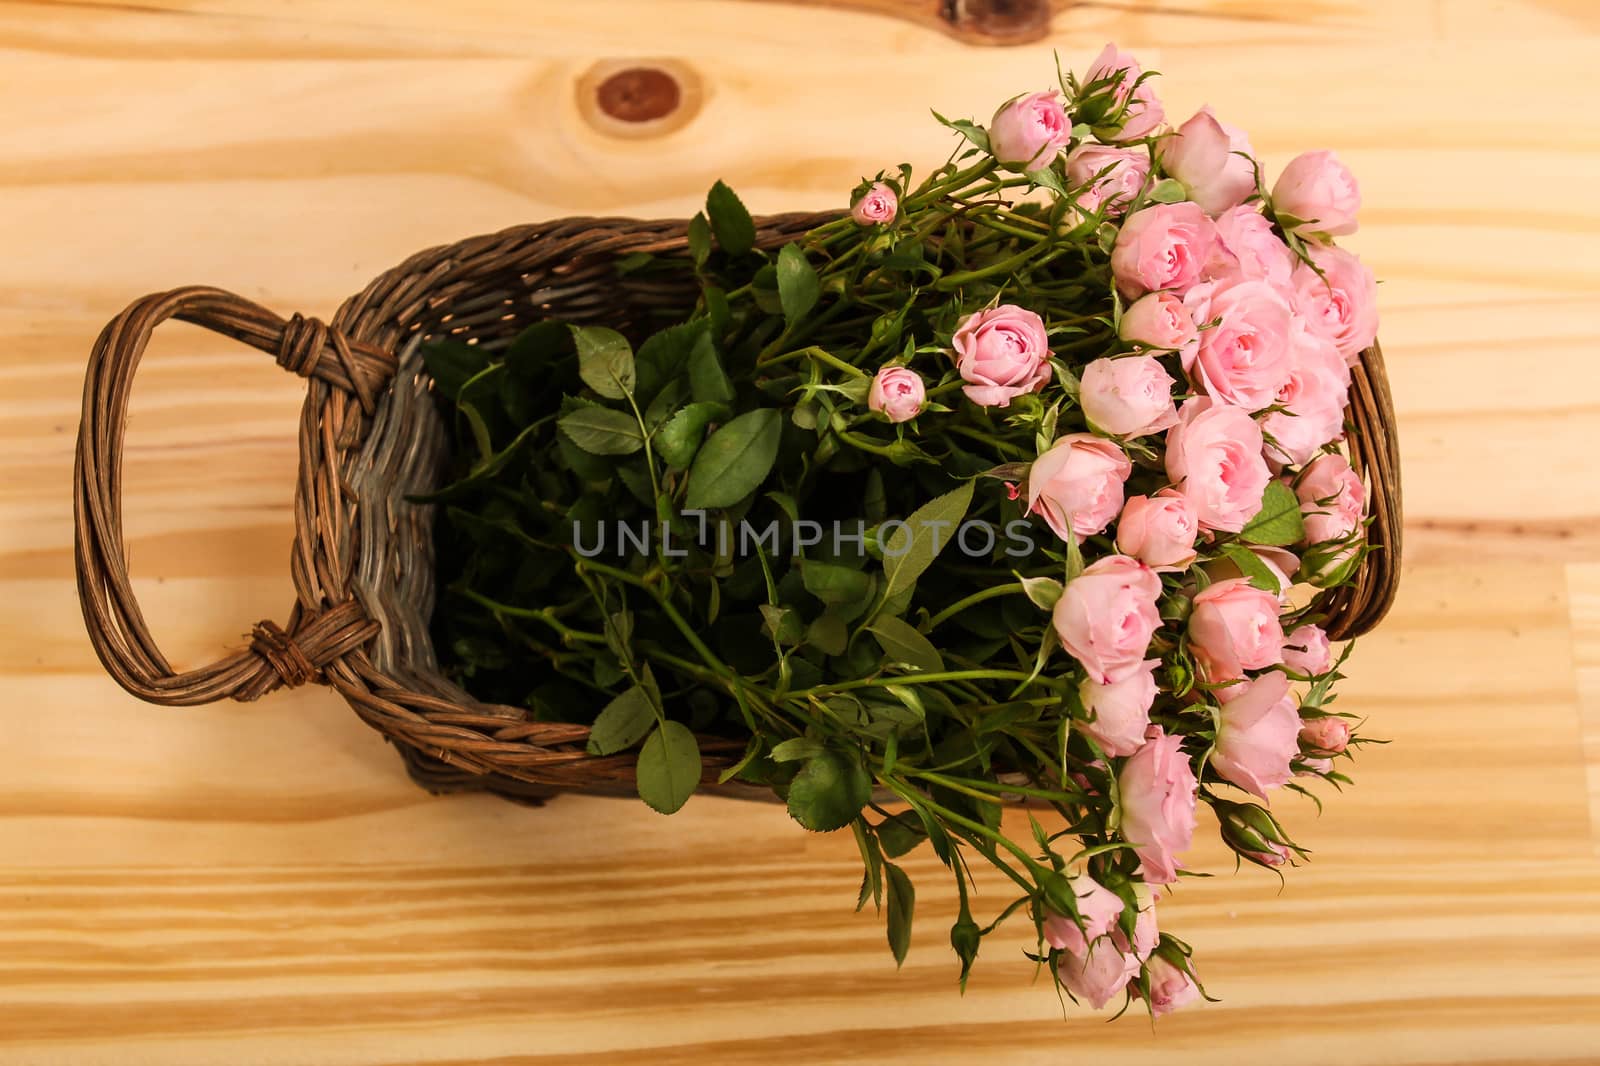 Roses in a basket by conejota